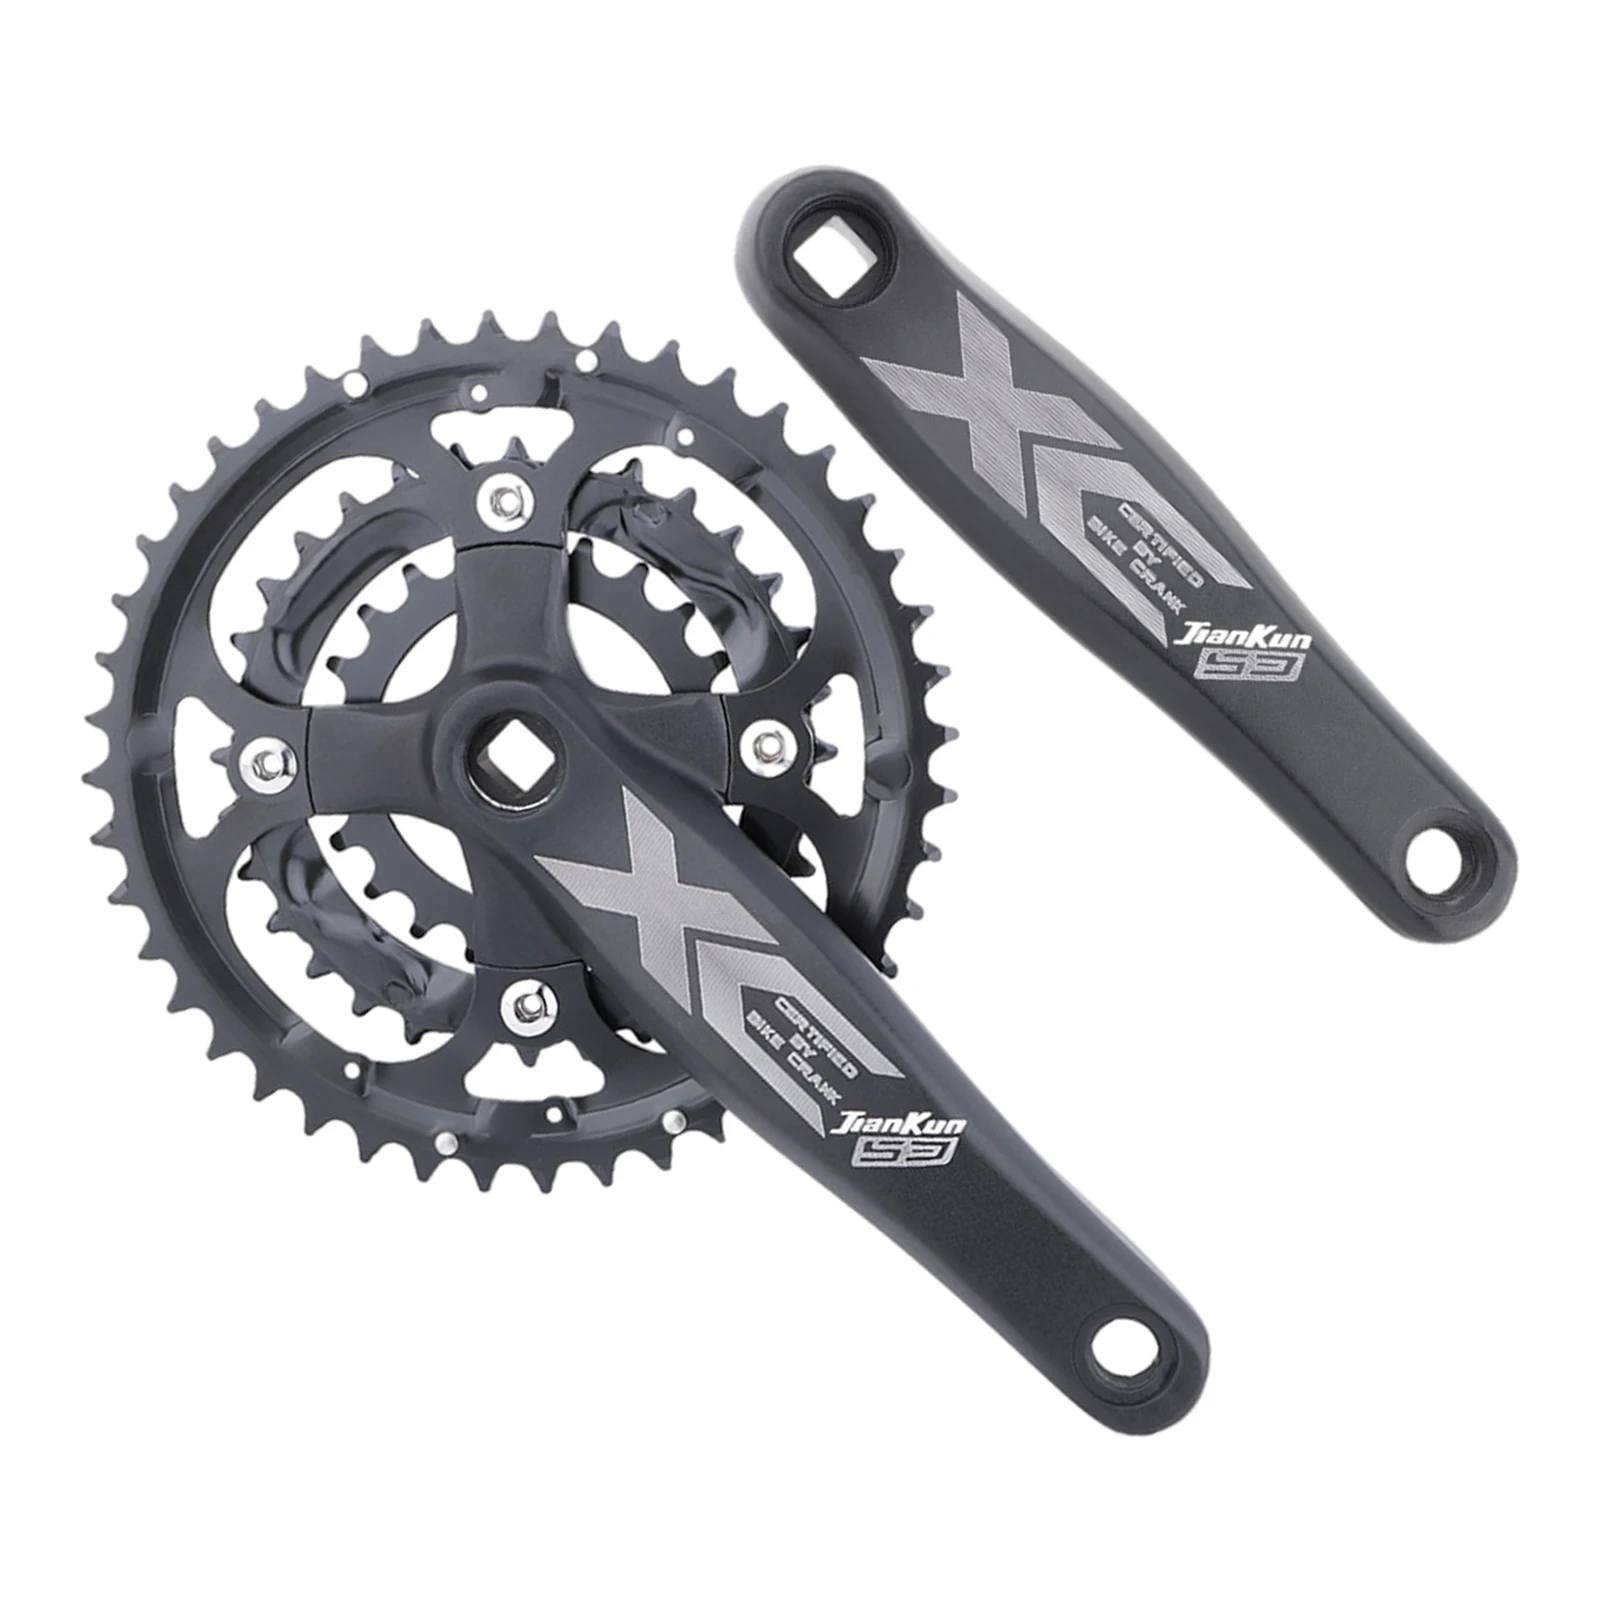 8 9 Speed Bicycle Crankset Arm Single Speed Crank 170mm Square Taper Fixed Modify Crank for Road Mountain Bike Gear